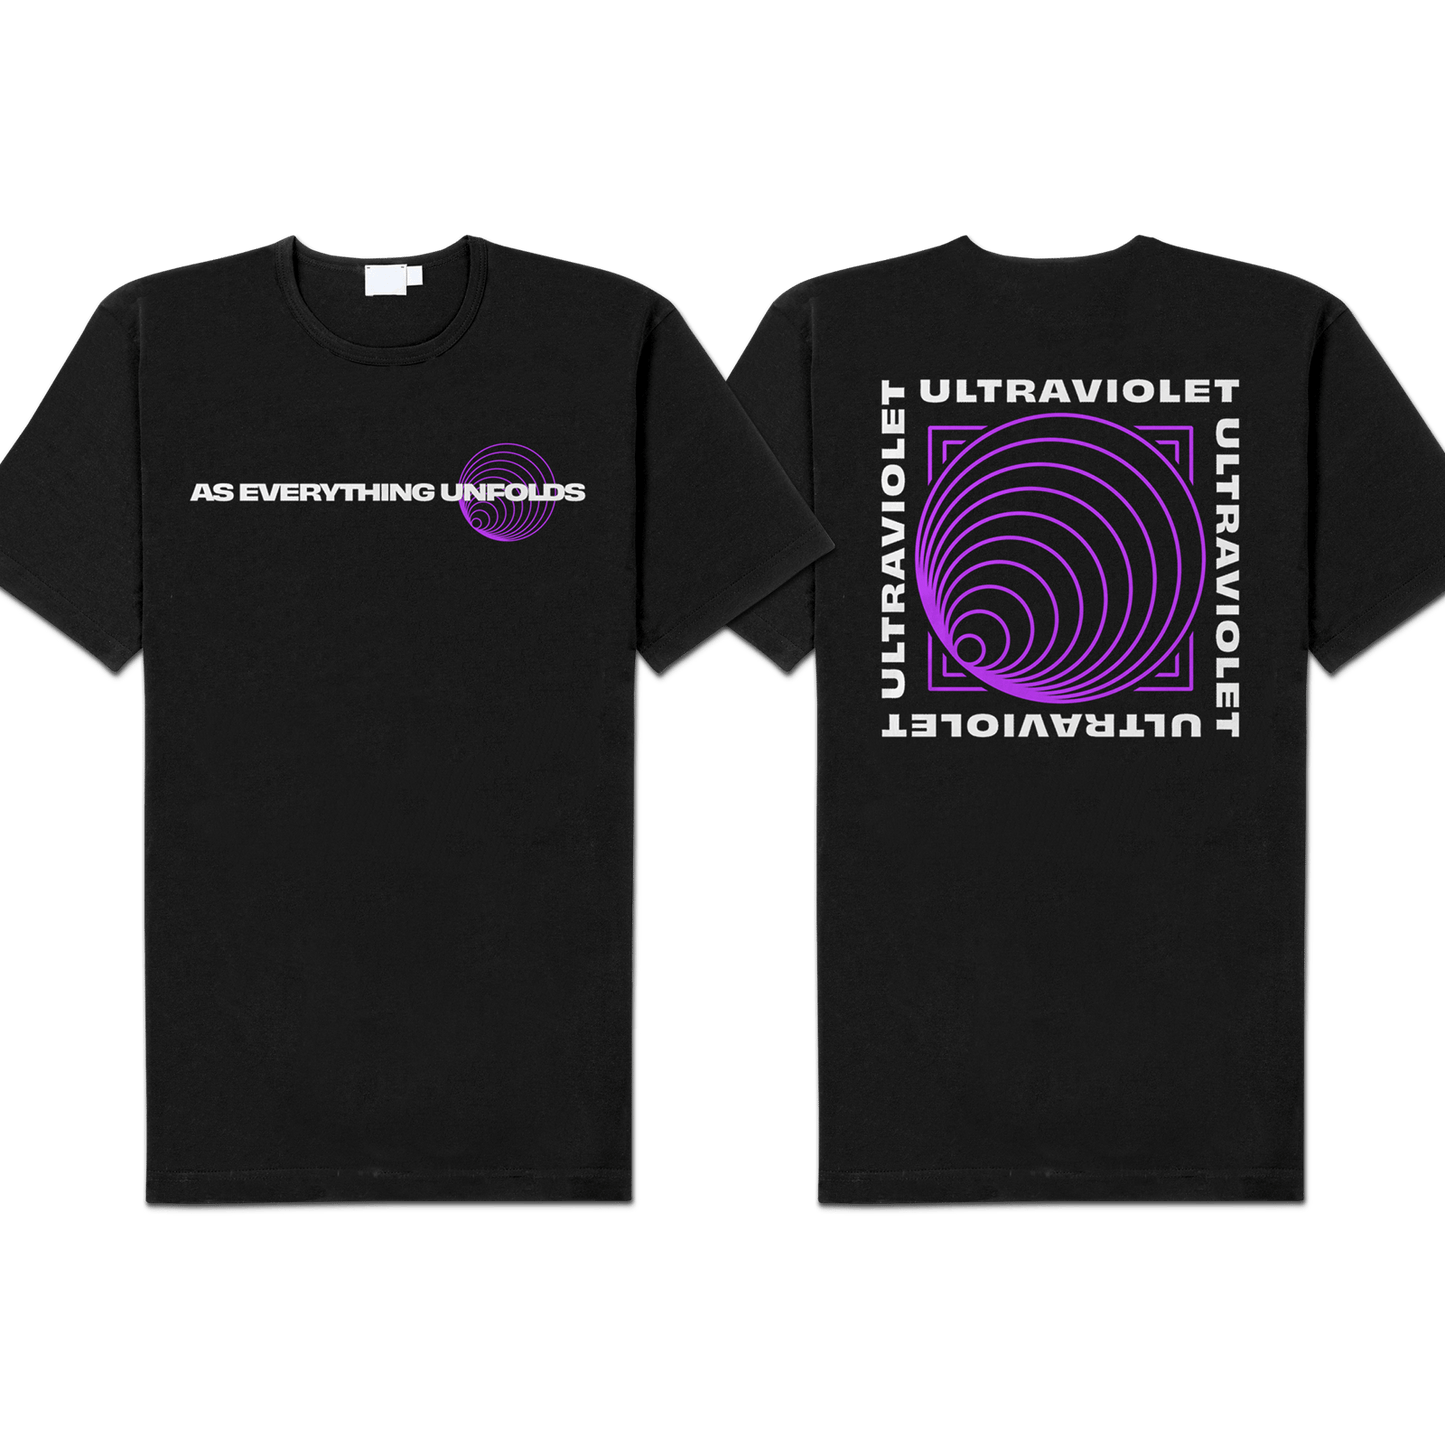 As Everything Unfolds "Ultraviolet" Shirt